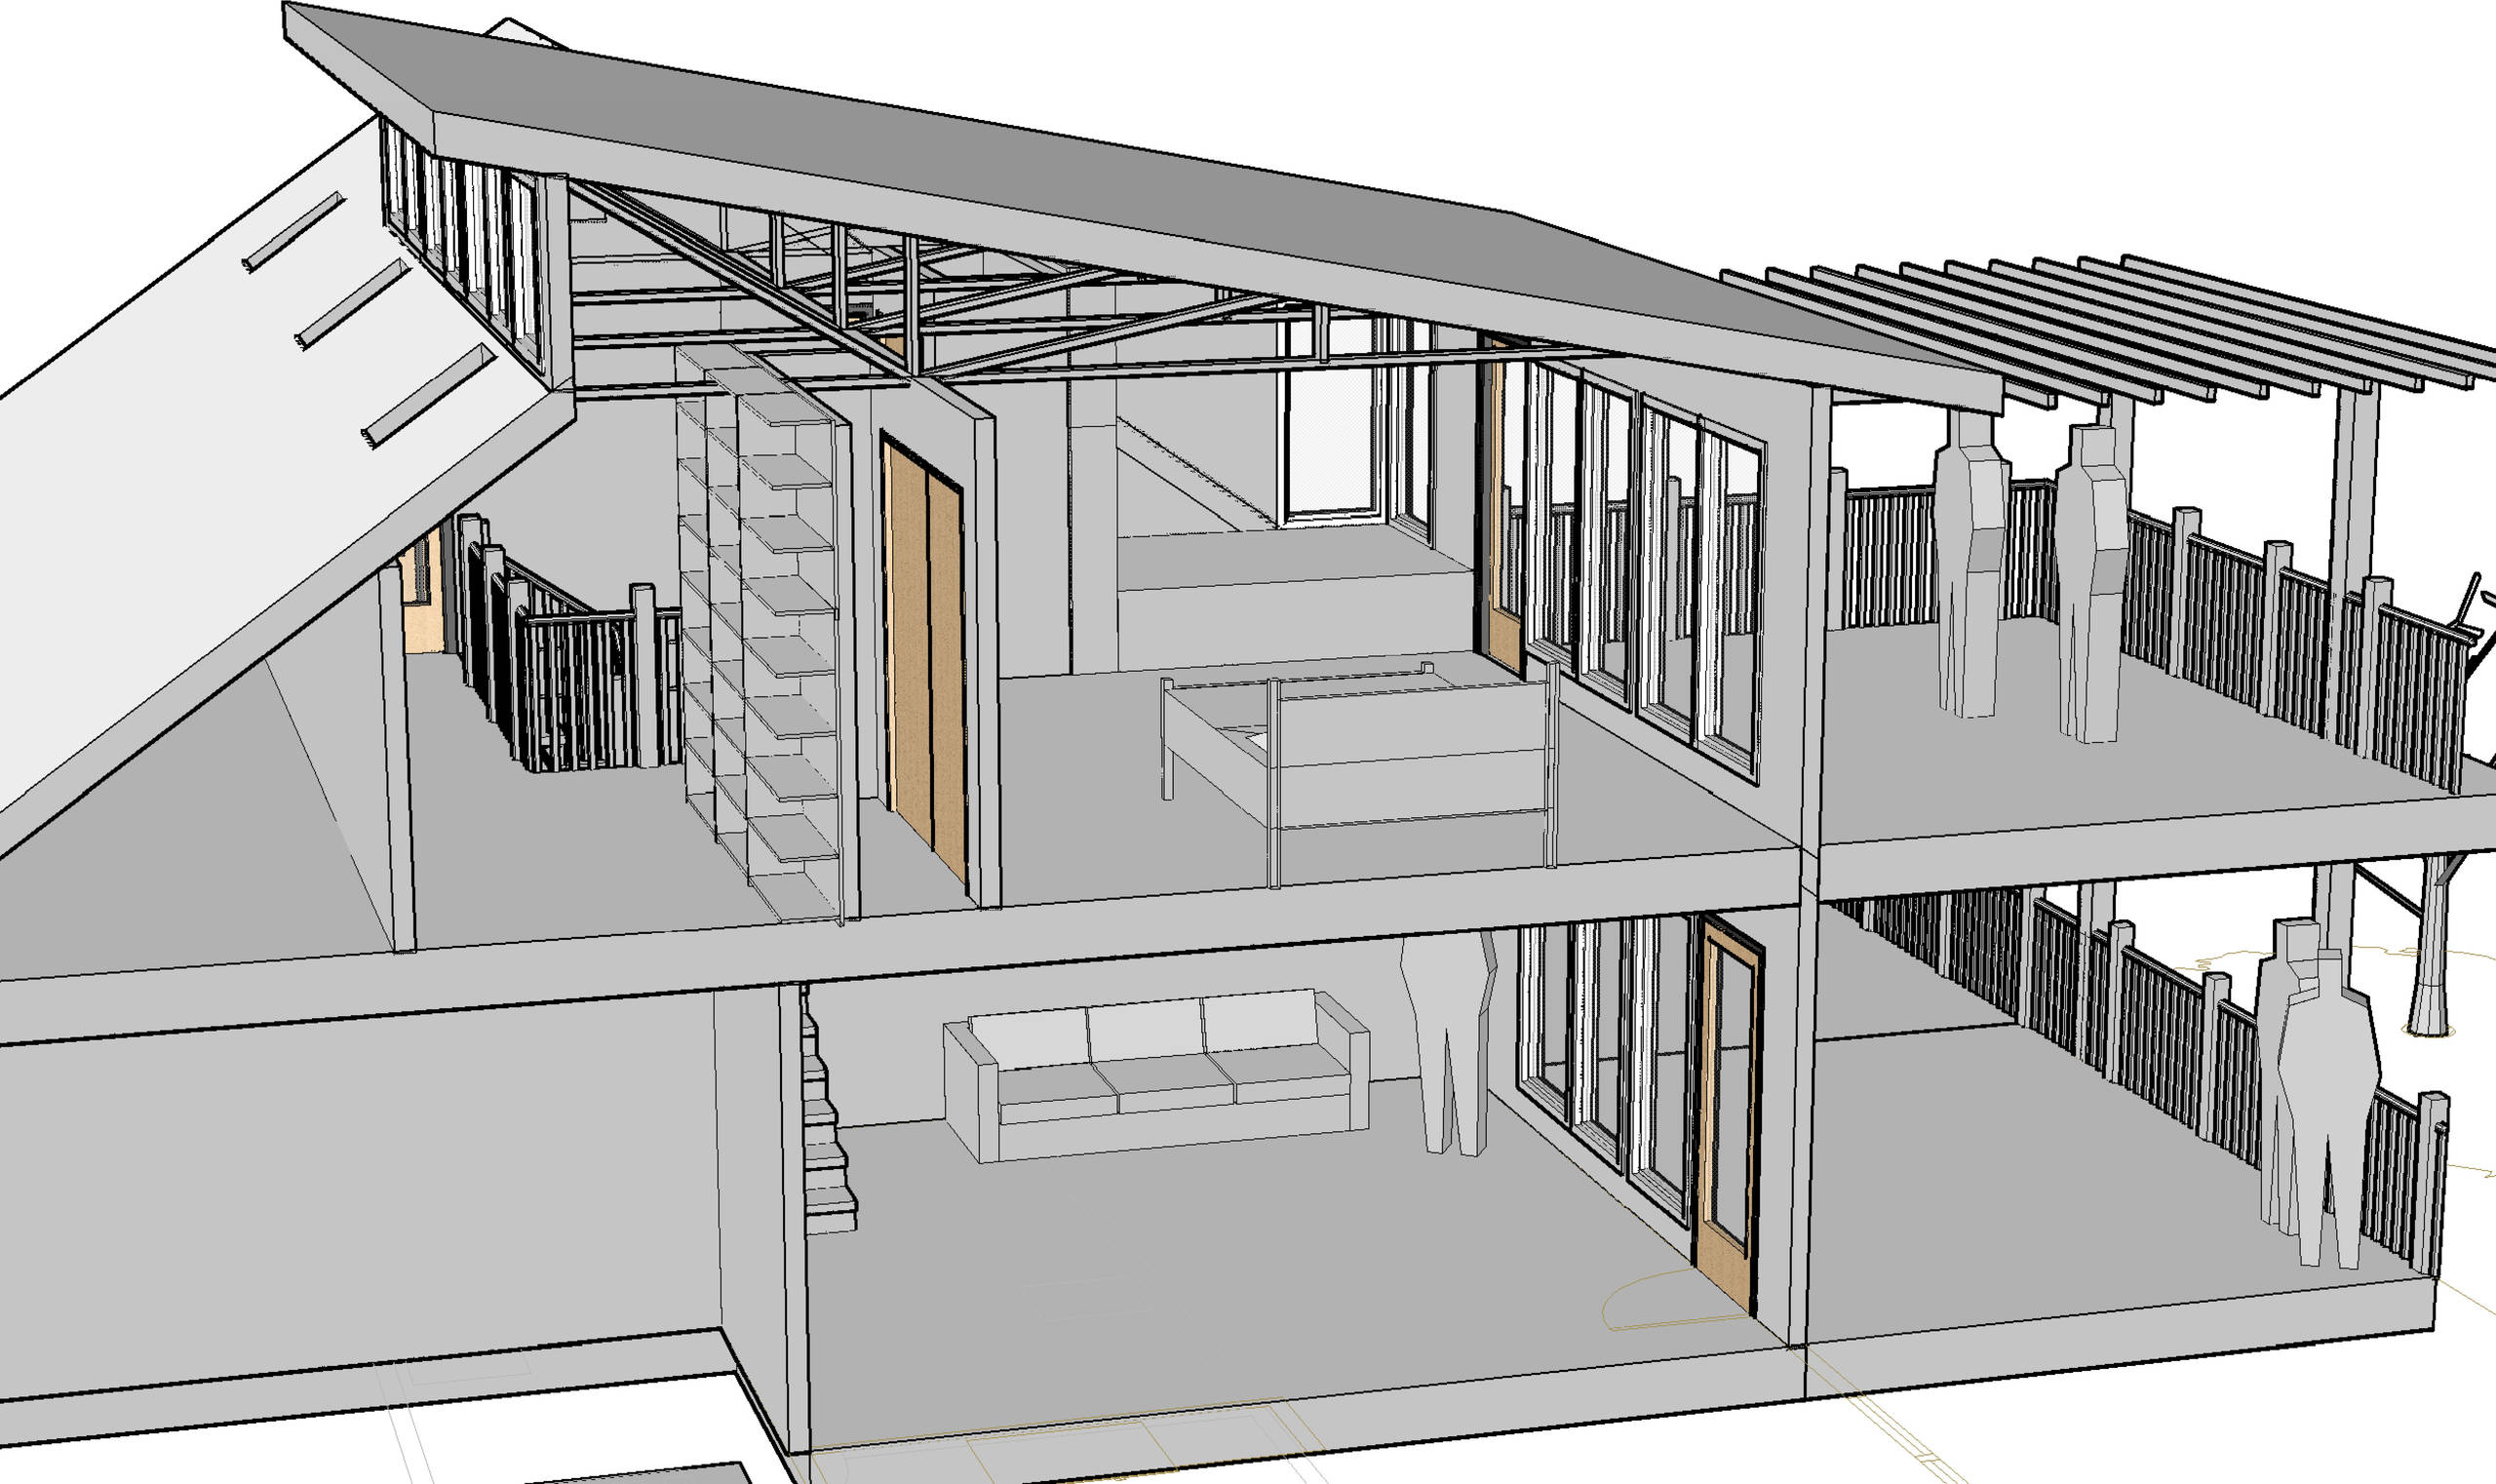 Section View showing lower living/deck and upper master bedroom and deck